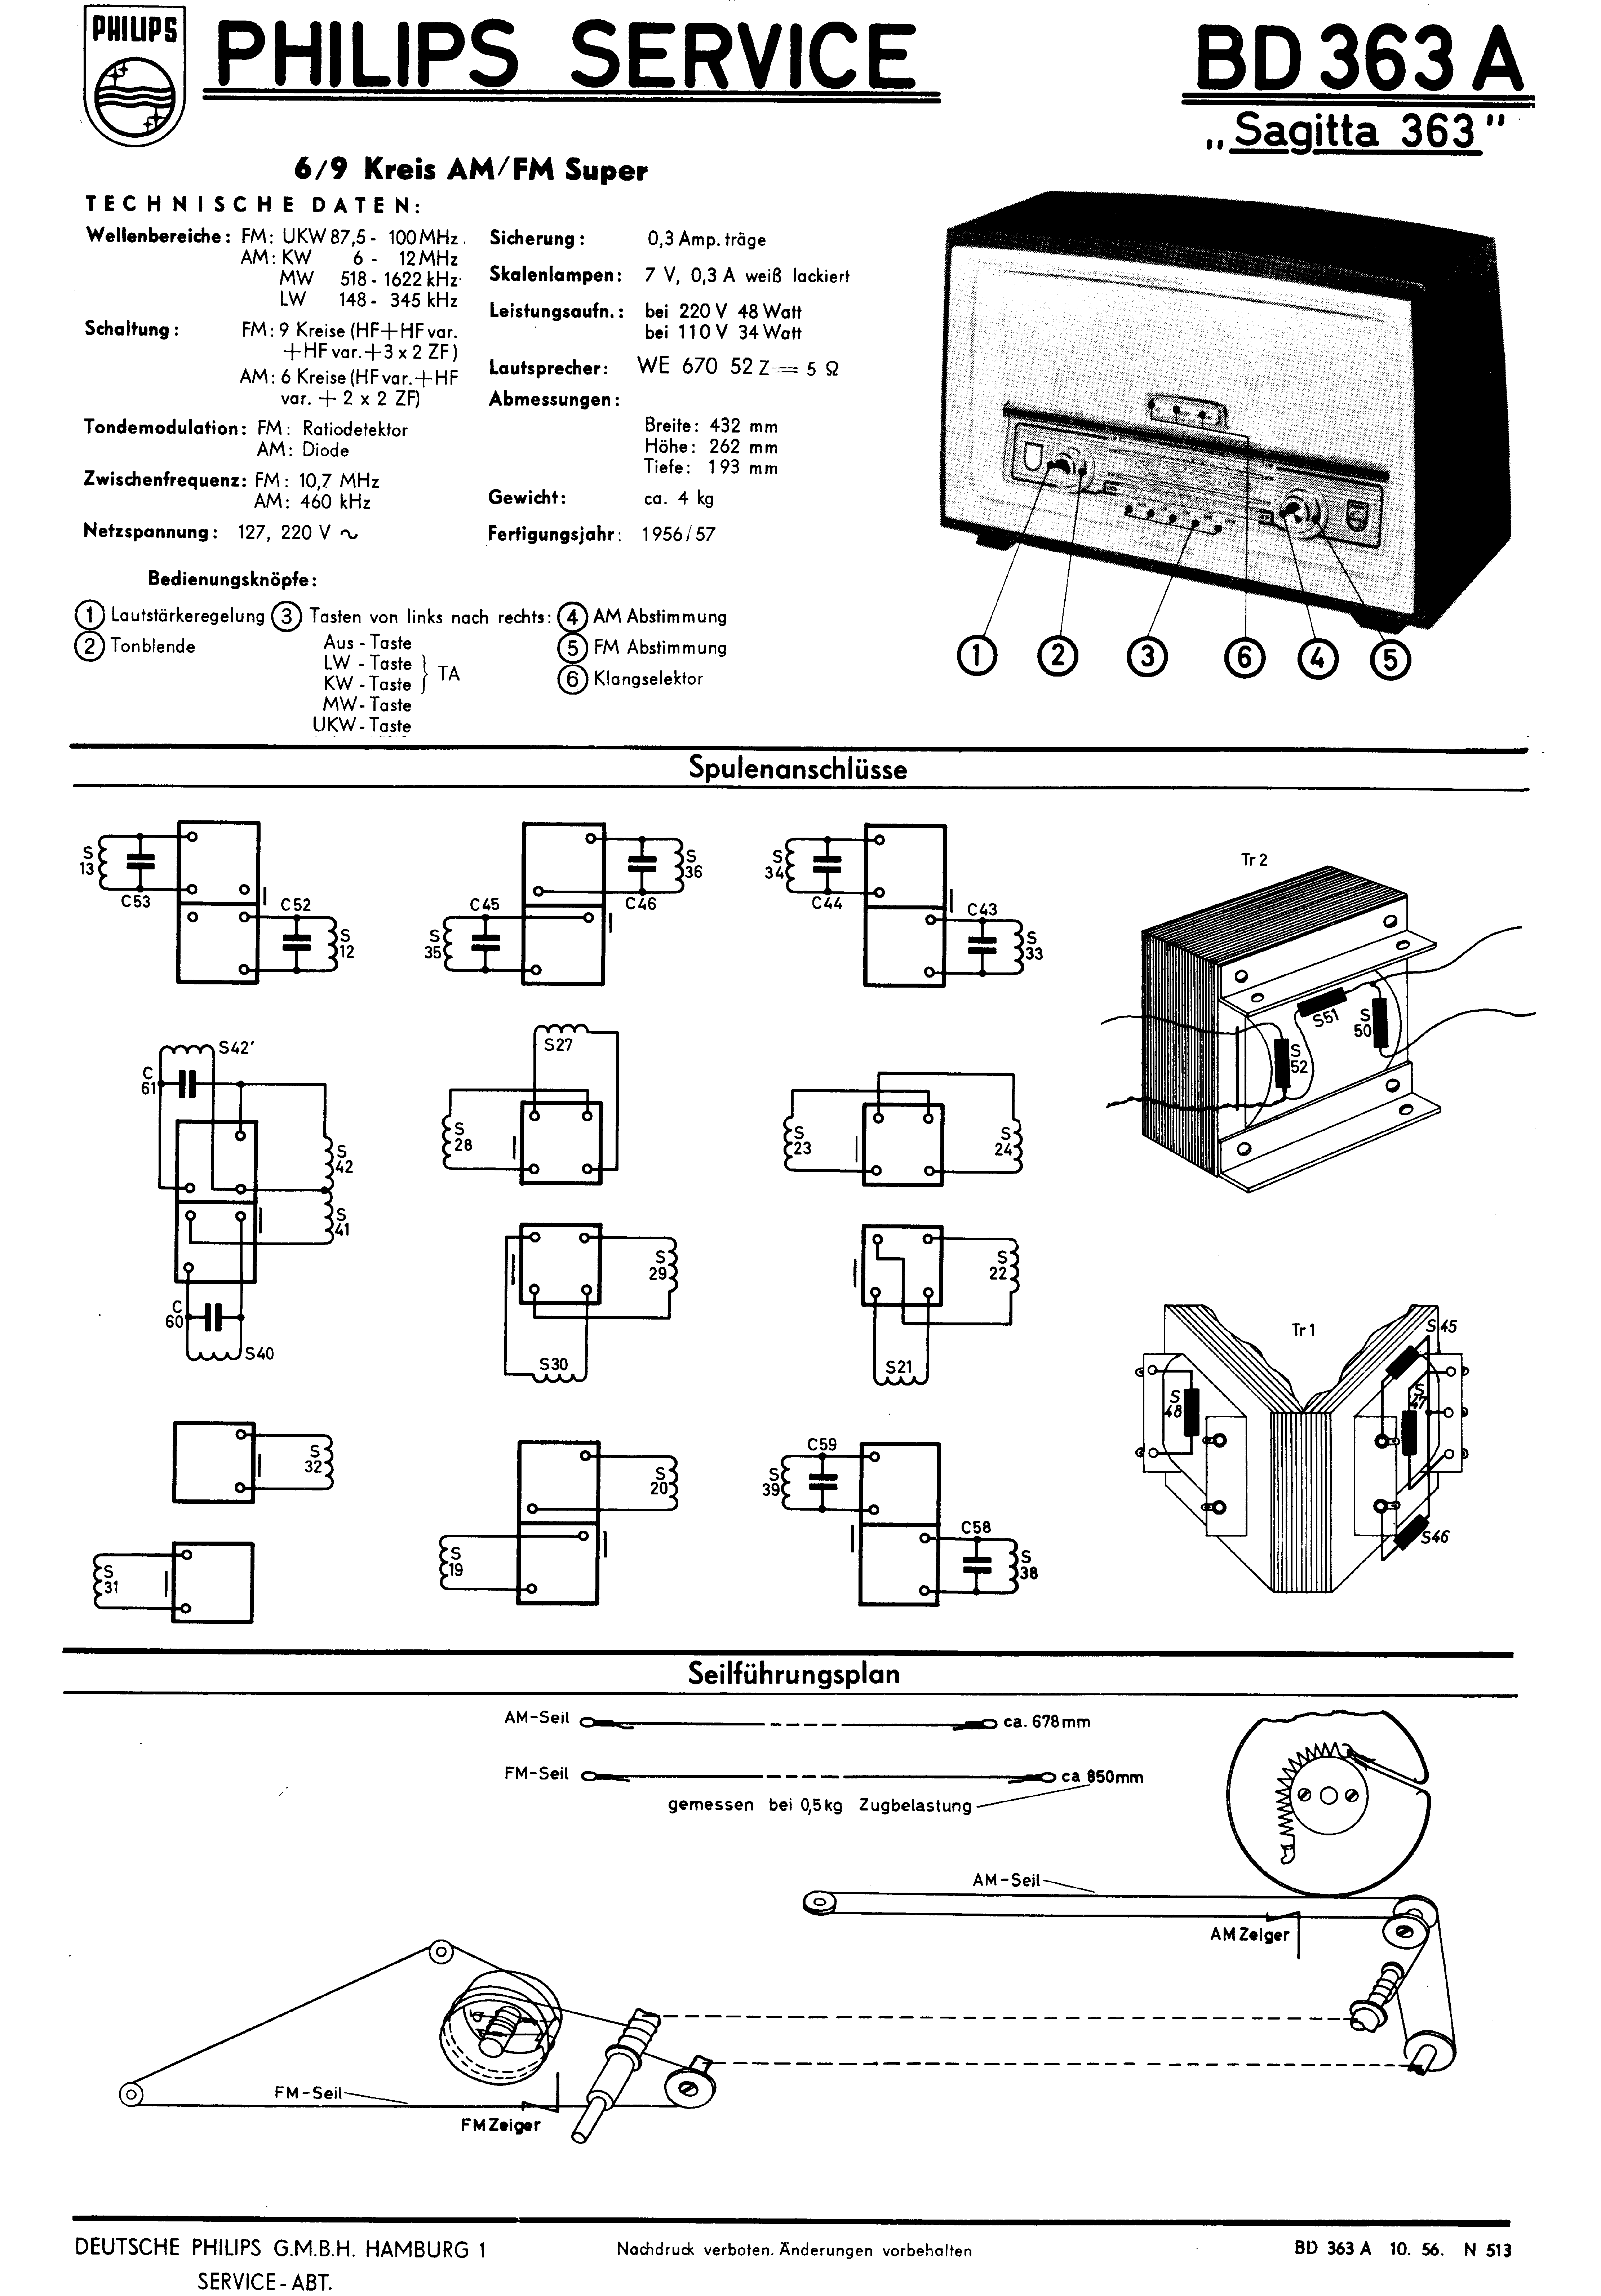 PHILIPS BD363A SAGITTA 363 SM service manual (1st page)